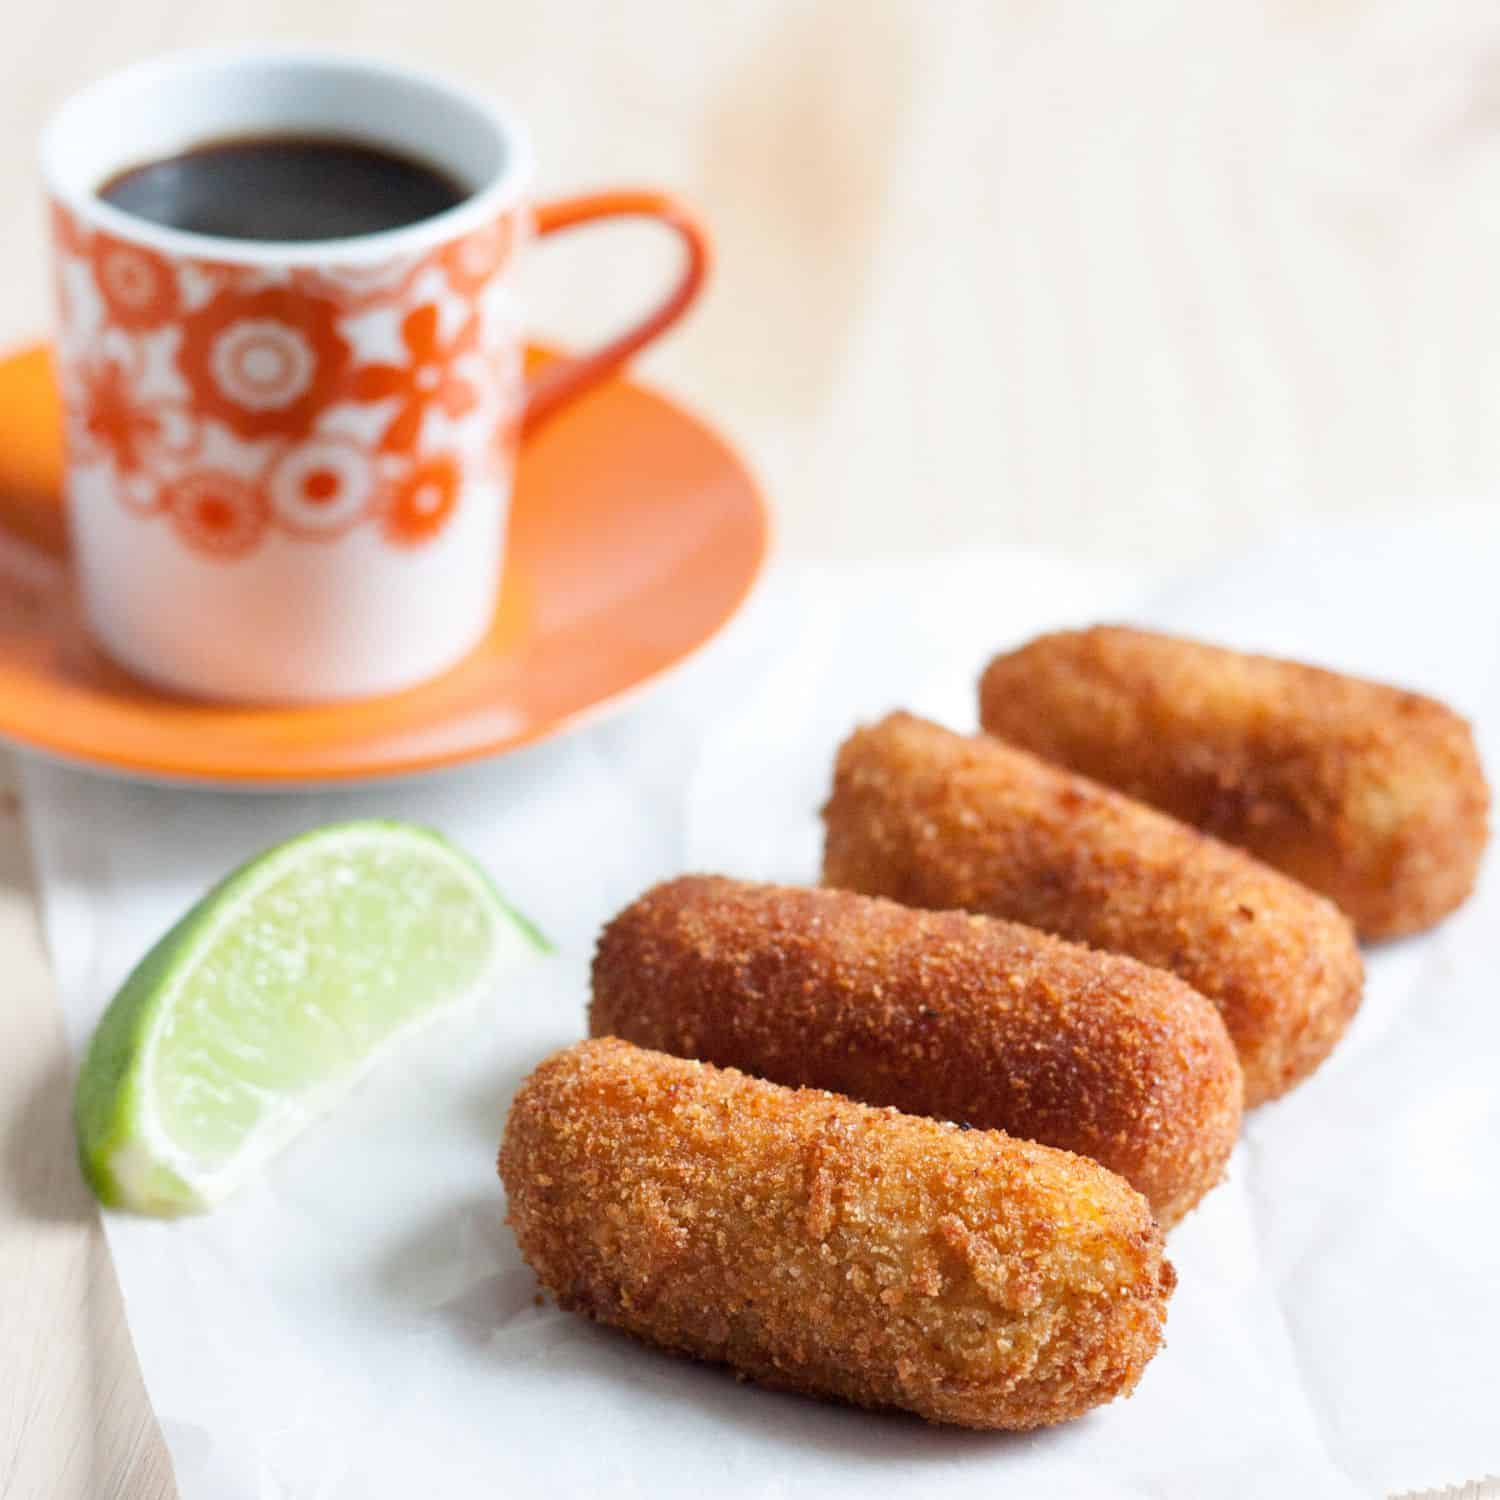 Travel to Miami not required. Make Cuban croquetas de jamon at home with this easy to follow recipe. You can even make them in advance and cook from frozen! Croquetas are a perfect afternoon snack paired with Cuban coffee, light lunch, appetizer, or party food idea. * GoodieGodmother.com